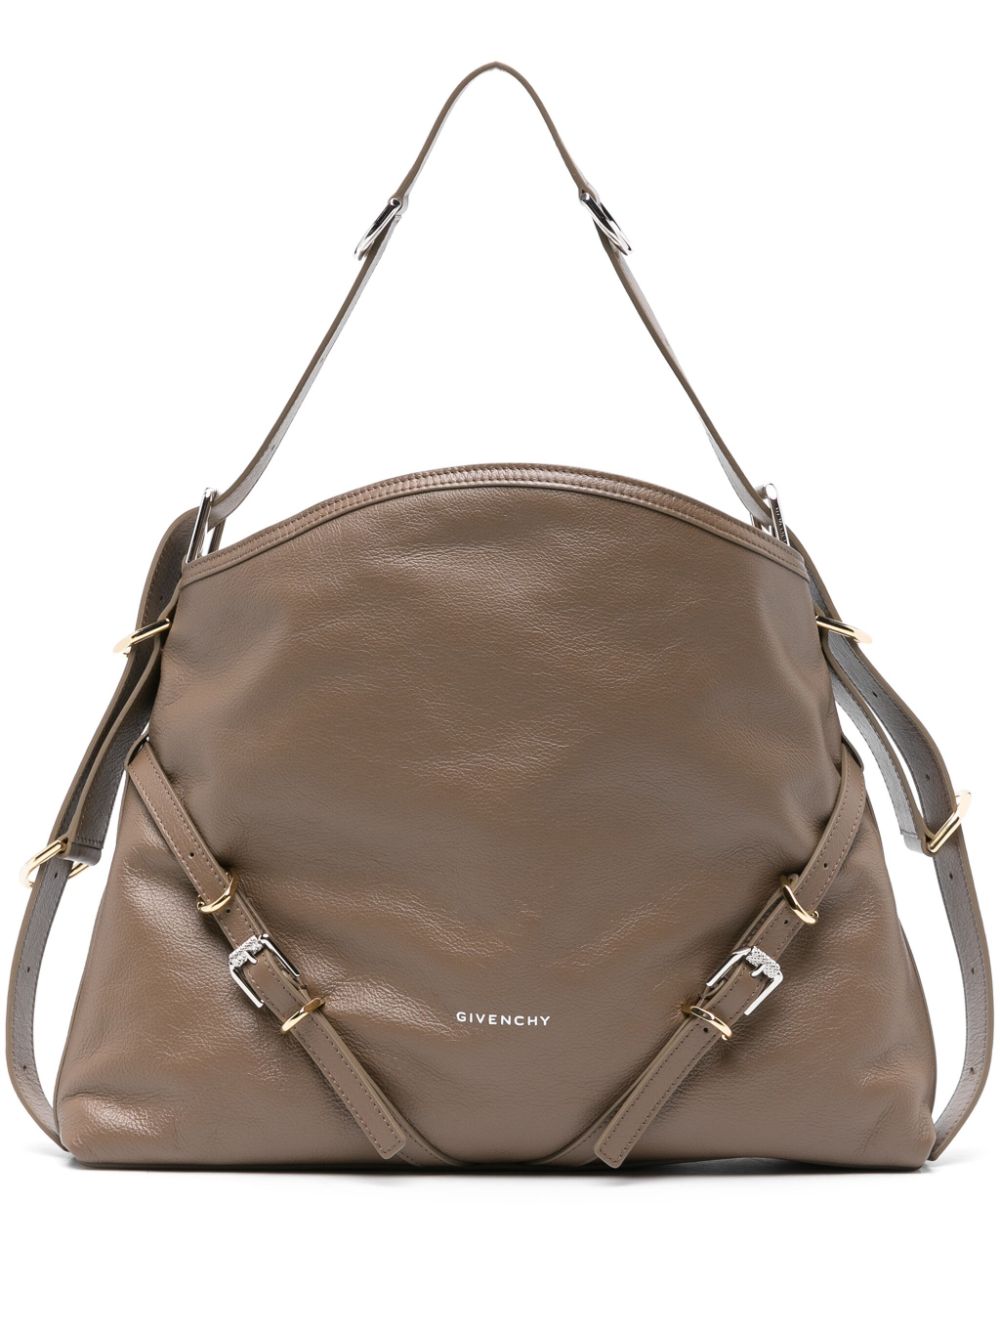 Shop Givenchy Taupe Calf Leather Shoulder & Crossbody Bag For Women